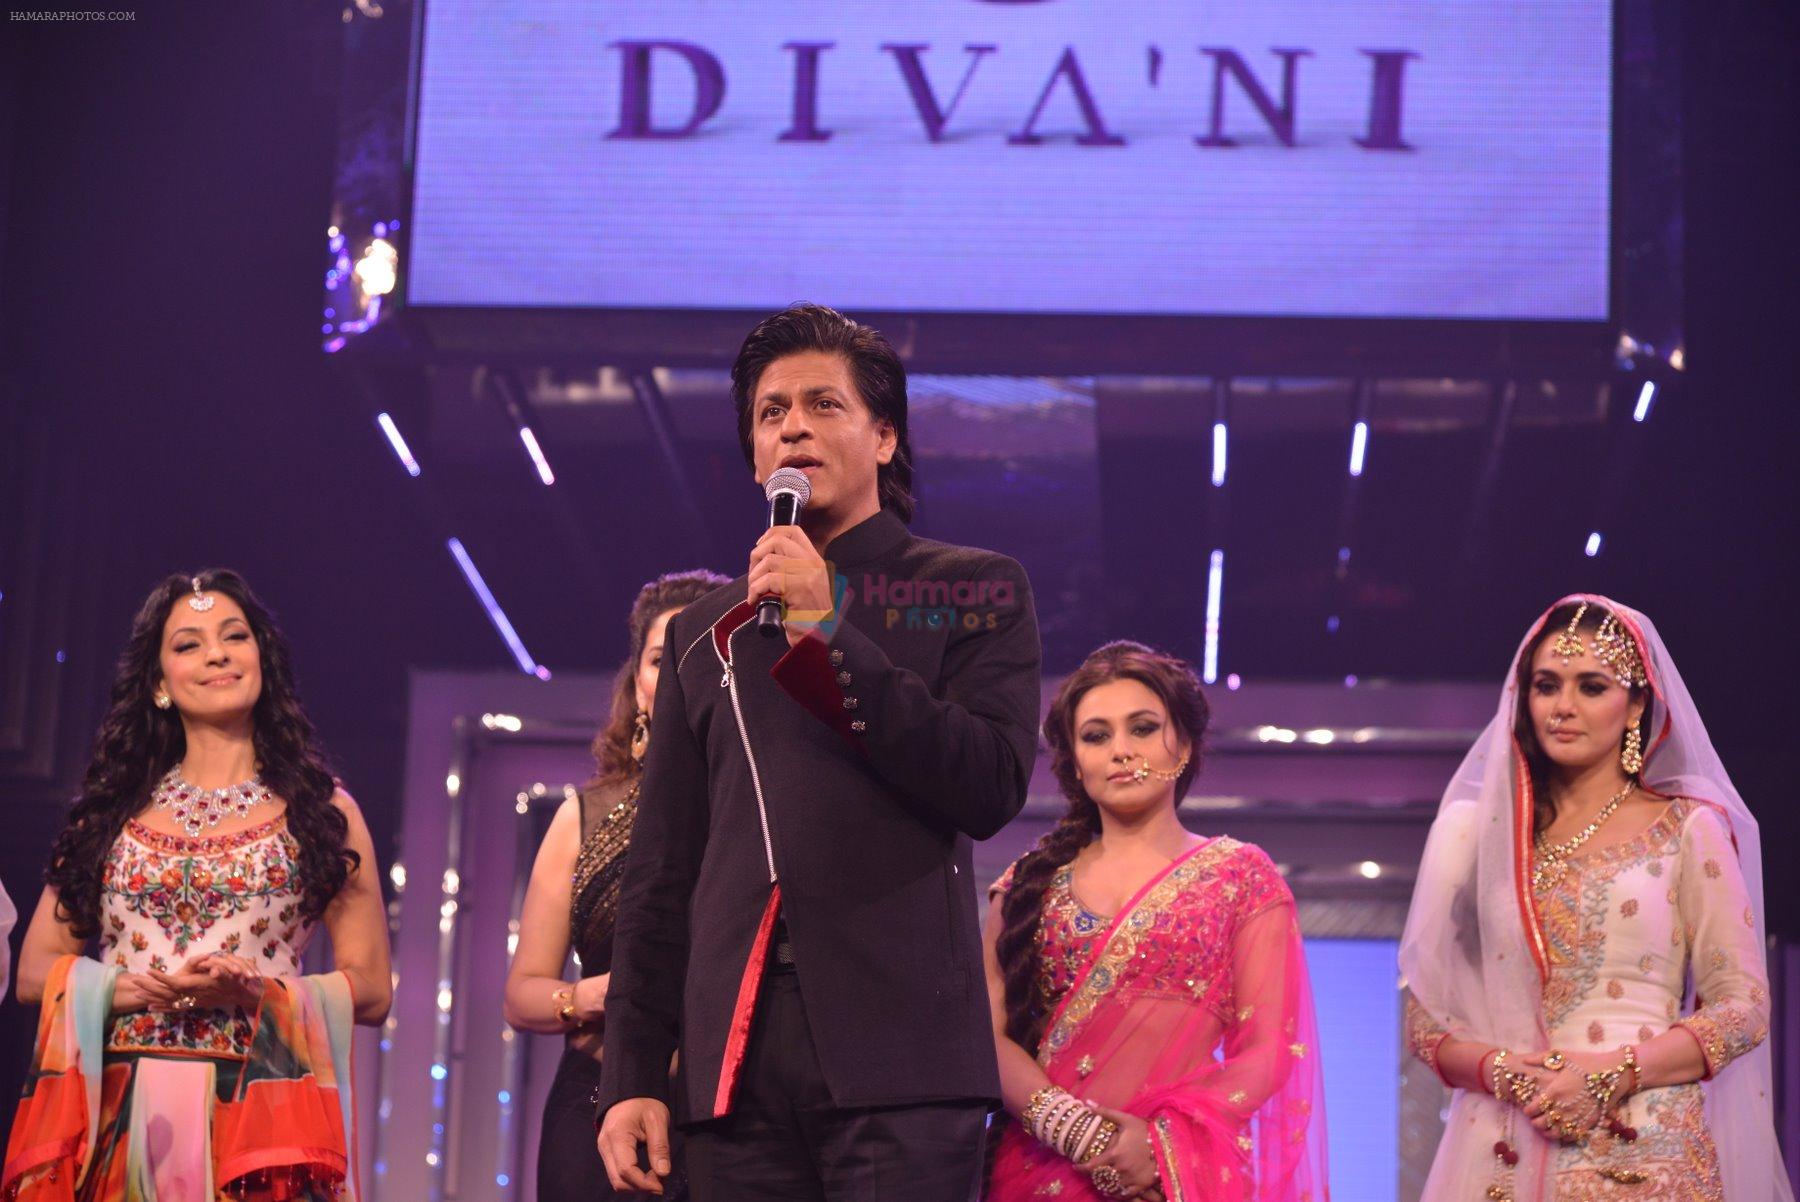 Shahrukh Khan at the launch of Diva_ni in Mumbai on 27th Sept 2013